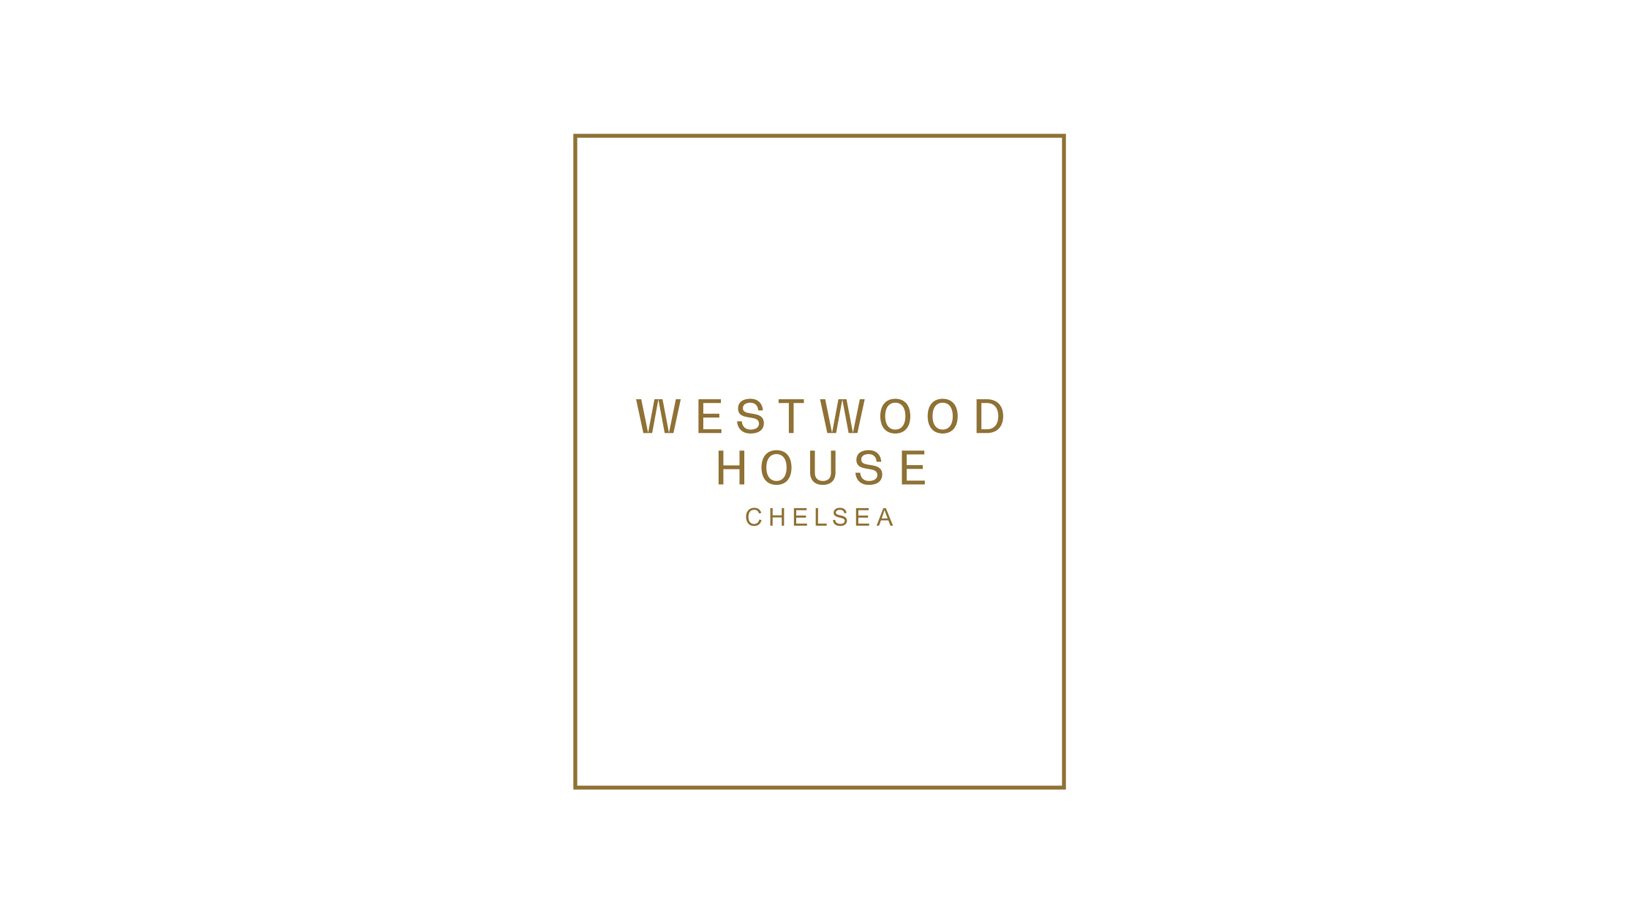 Westwood House show home now available to view